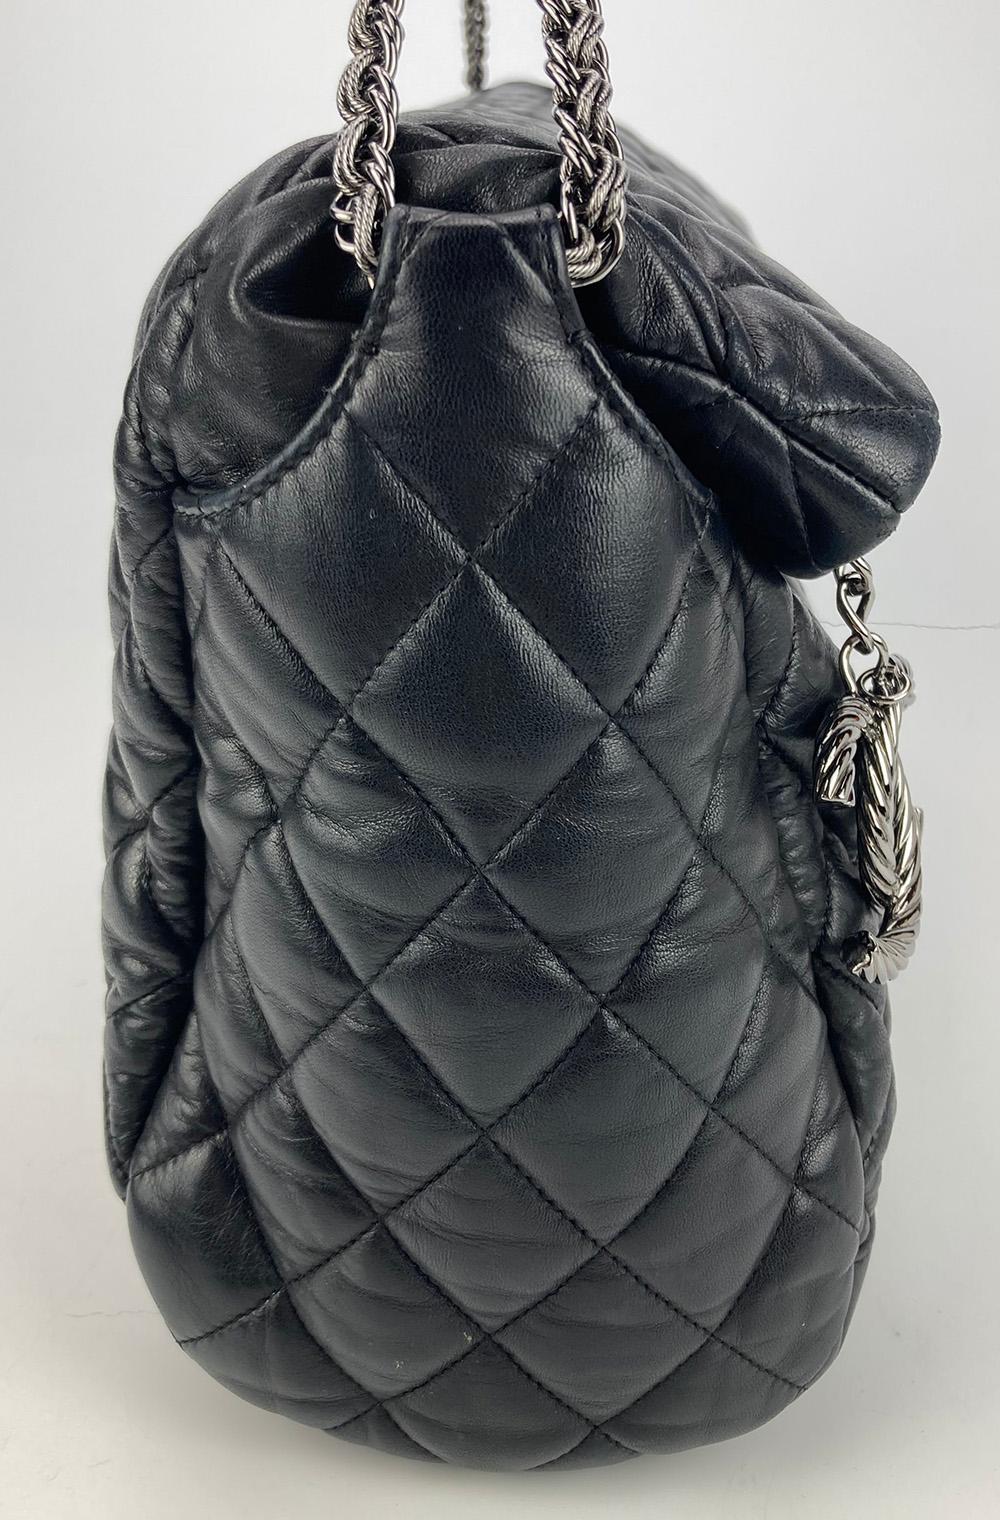 Chanel Paris-Moscow Red Square Kremlin Large Shoulder Bag in excellent condition. Black quilted leather exterior with unique quilted moscow scene along front side. Silver CC logo zip pull and matching braided chain shoulder strap. Top zipper closure